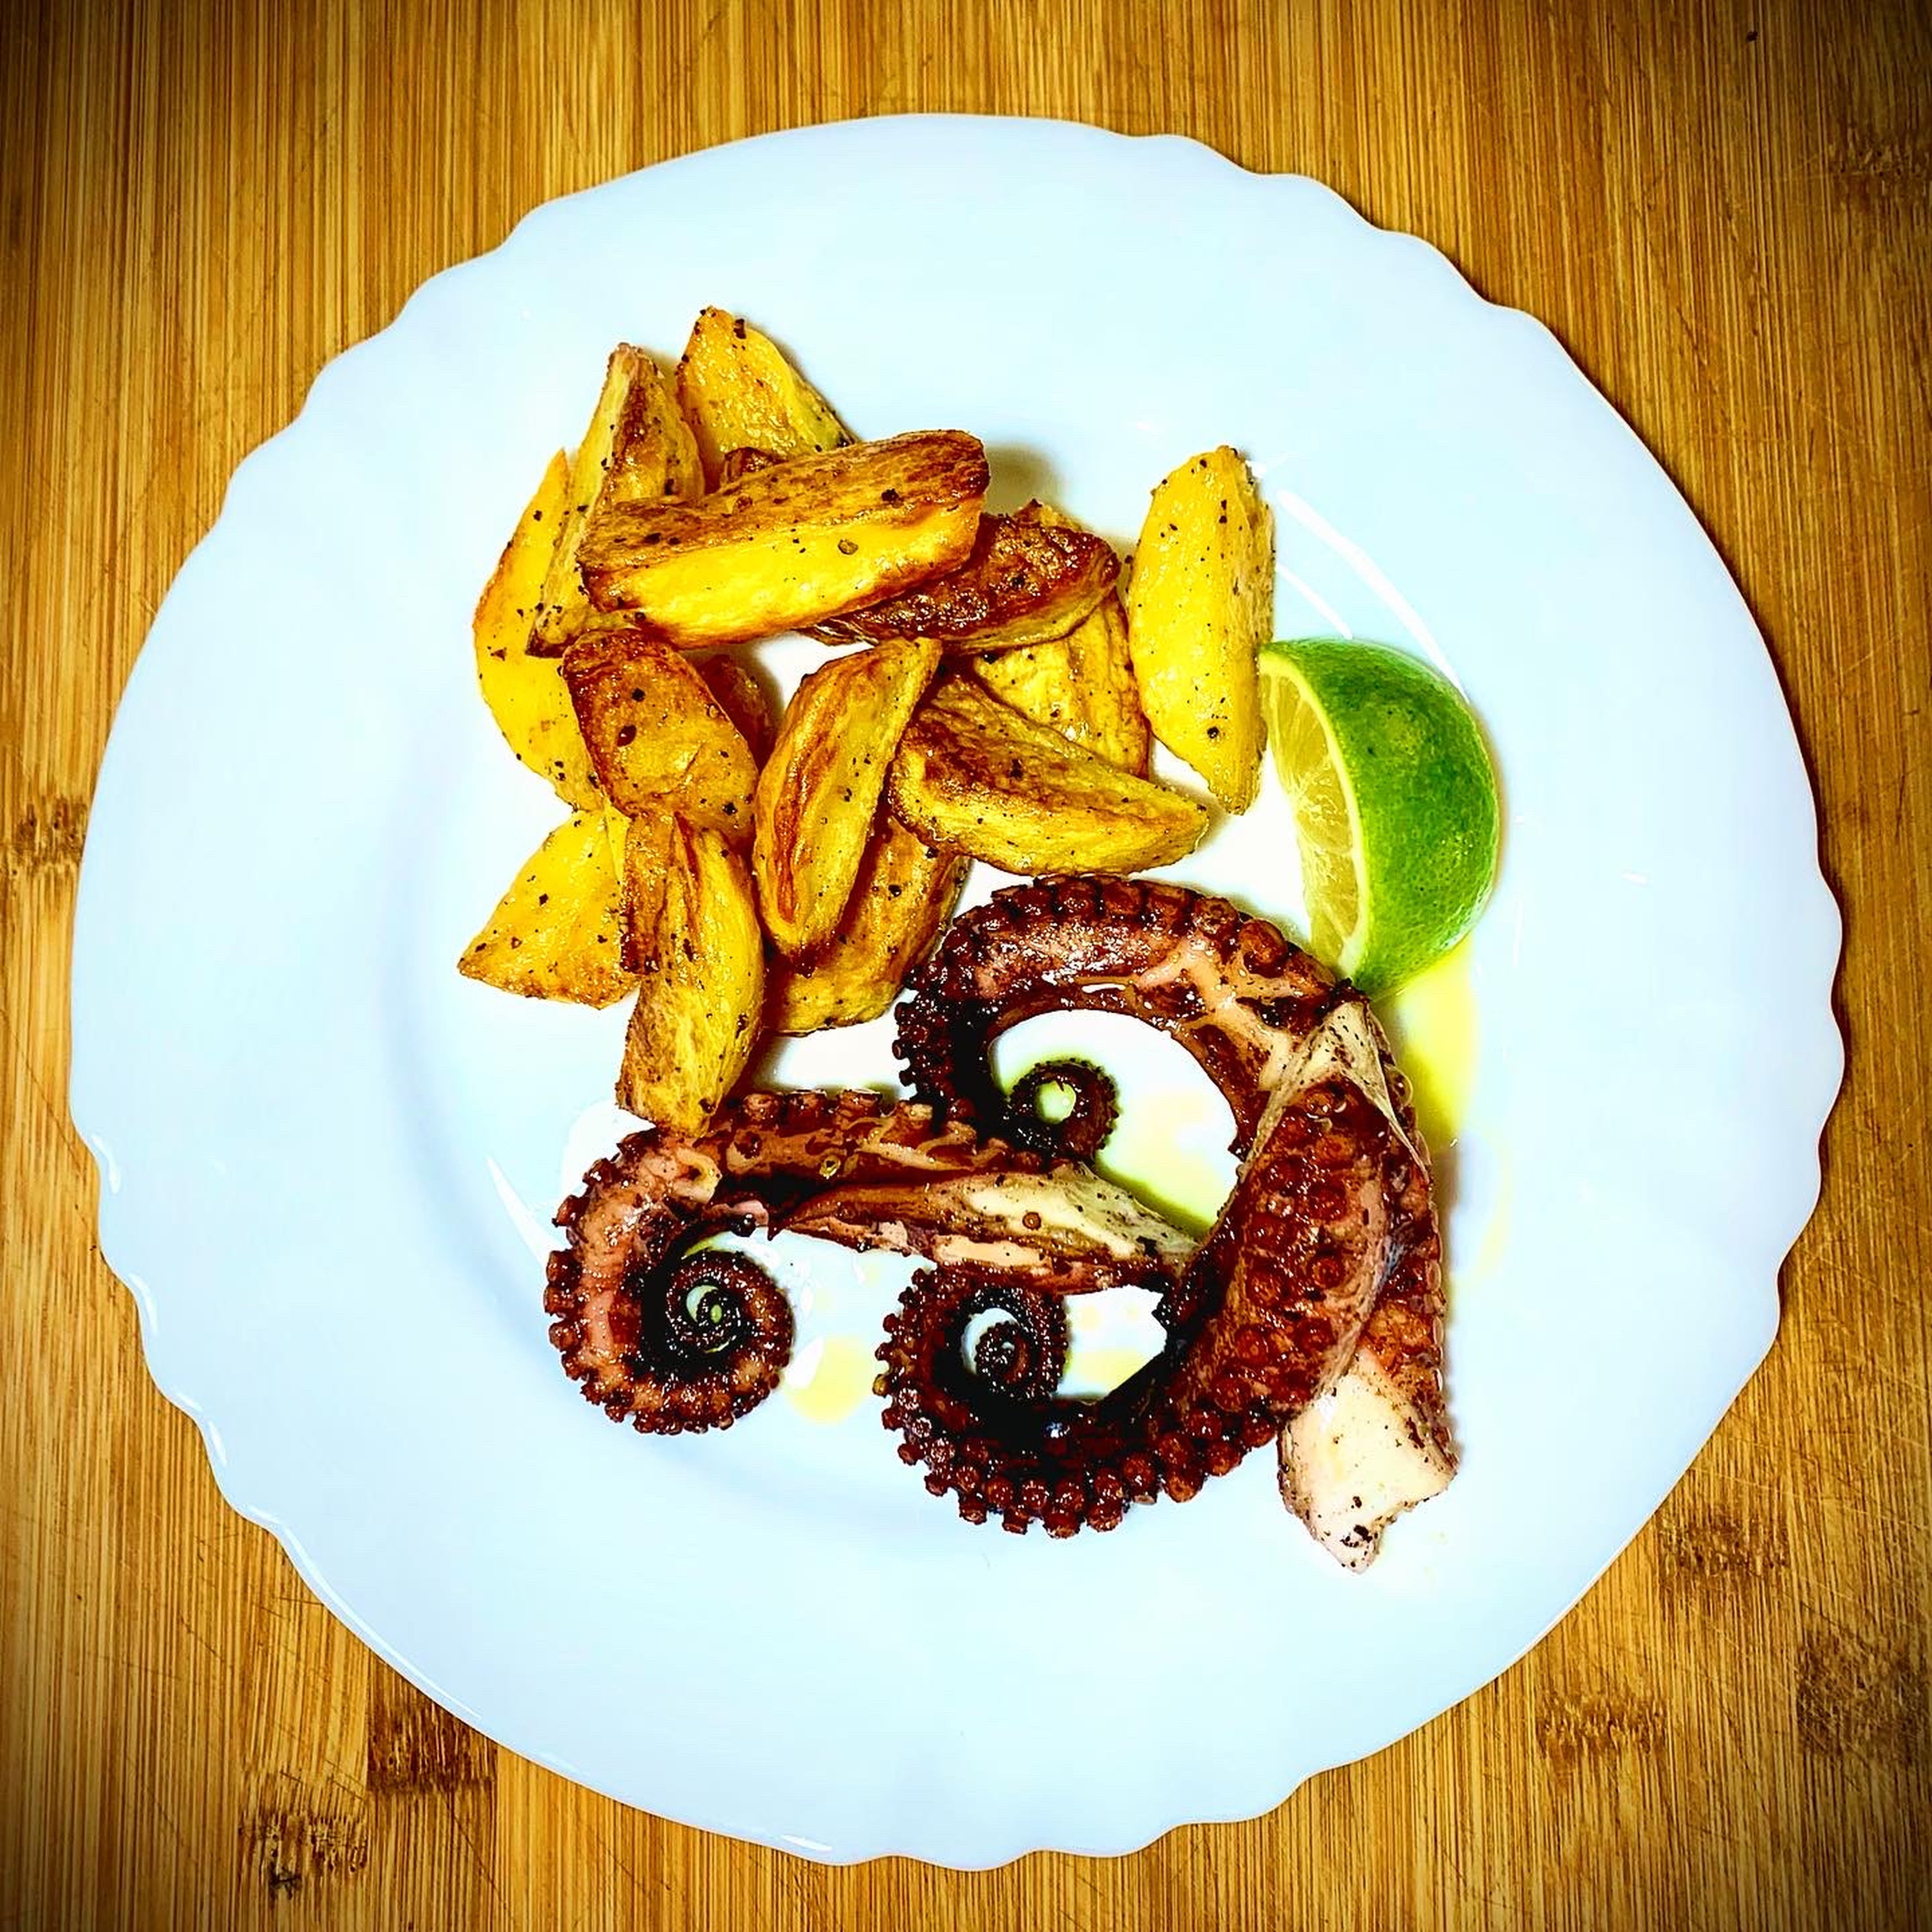 Octopus with baked potatoes